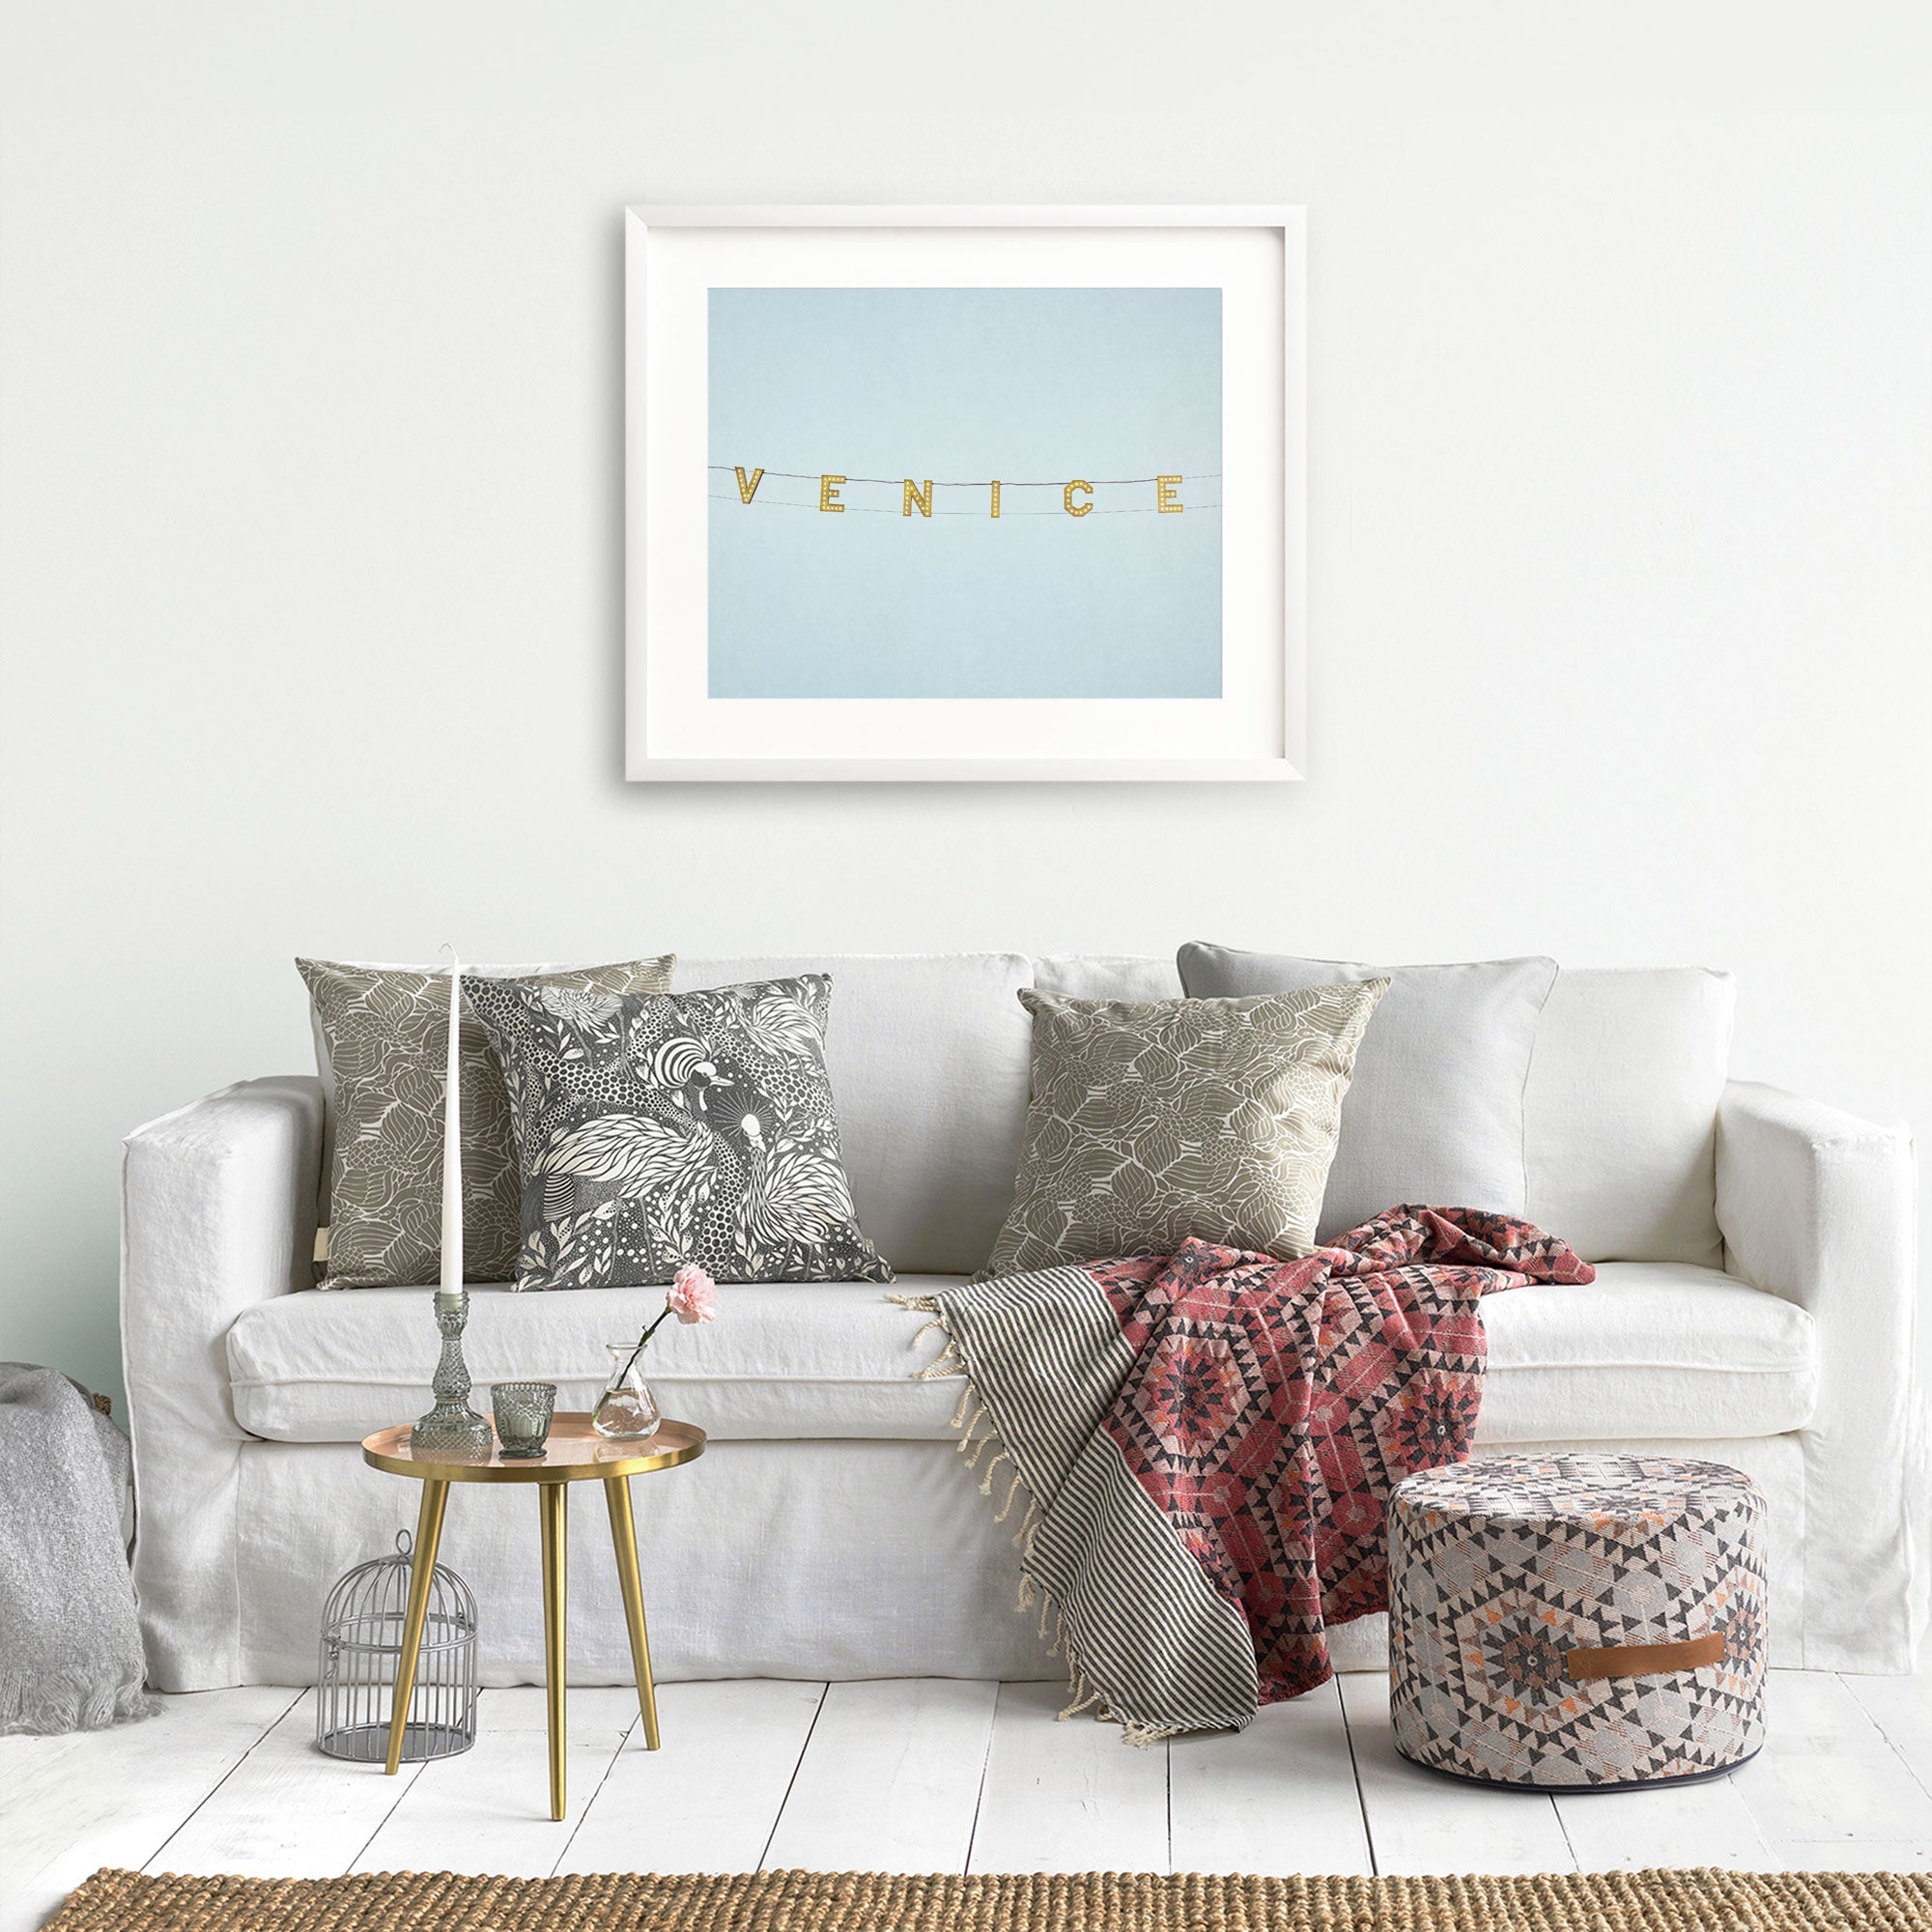 A cozy living room corner with a white sofa adorned with patterned pillows, a red blanket, and unframed California coastal photography prints on the wall above. A small side table with books and a Offley Green&#39;s Venice Beach Sign Print, &#39;Blue Venice&#39;.